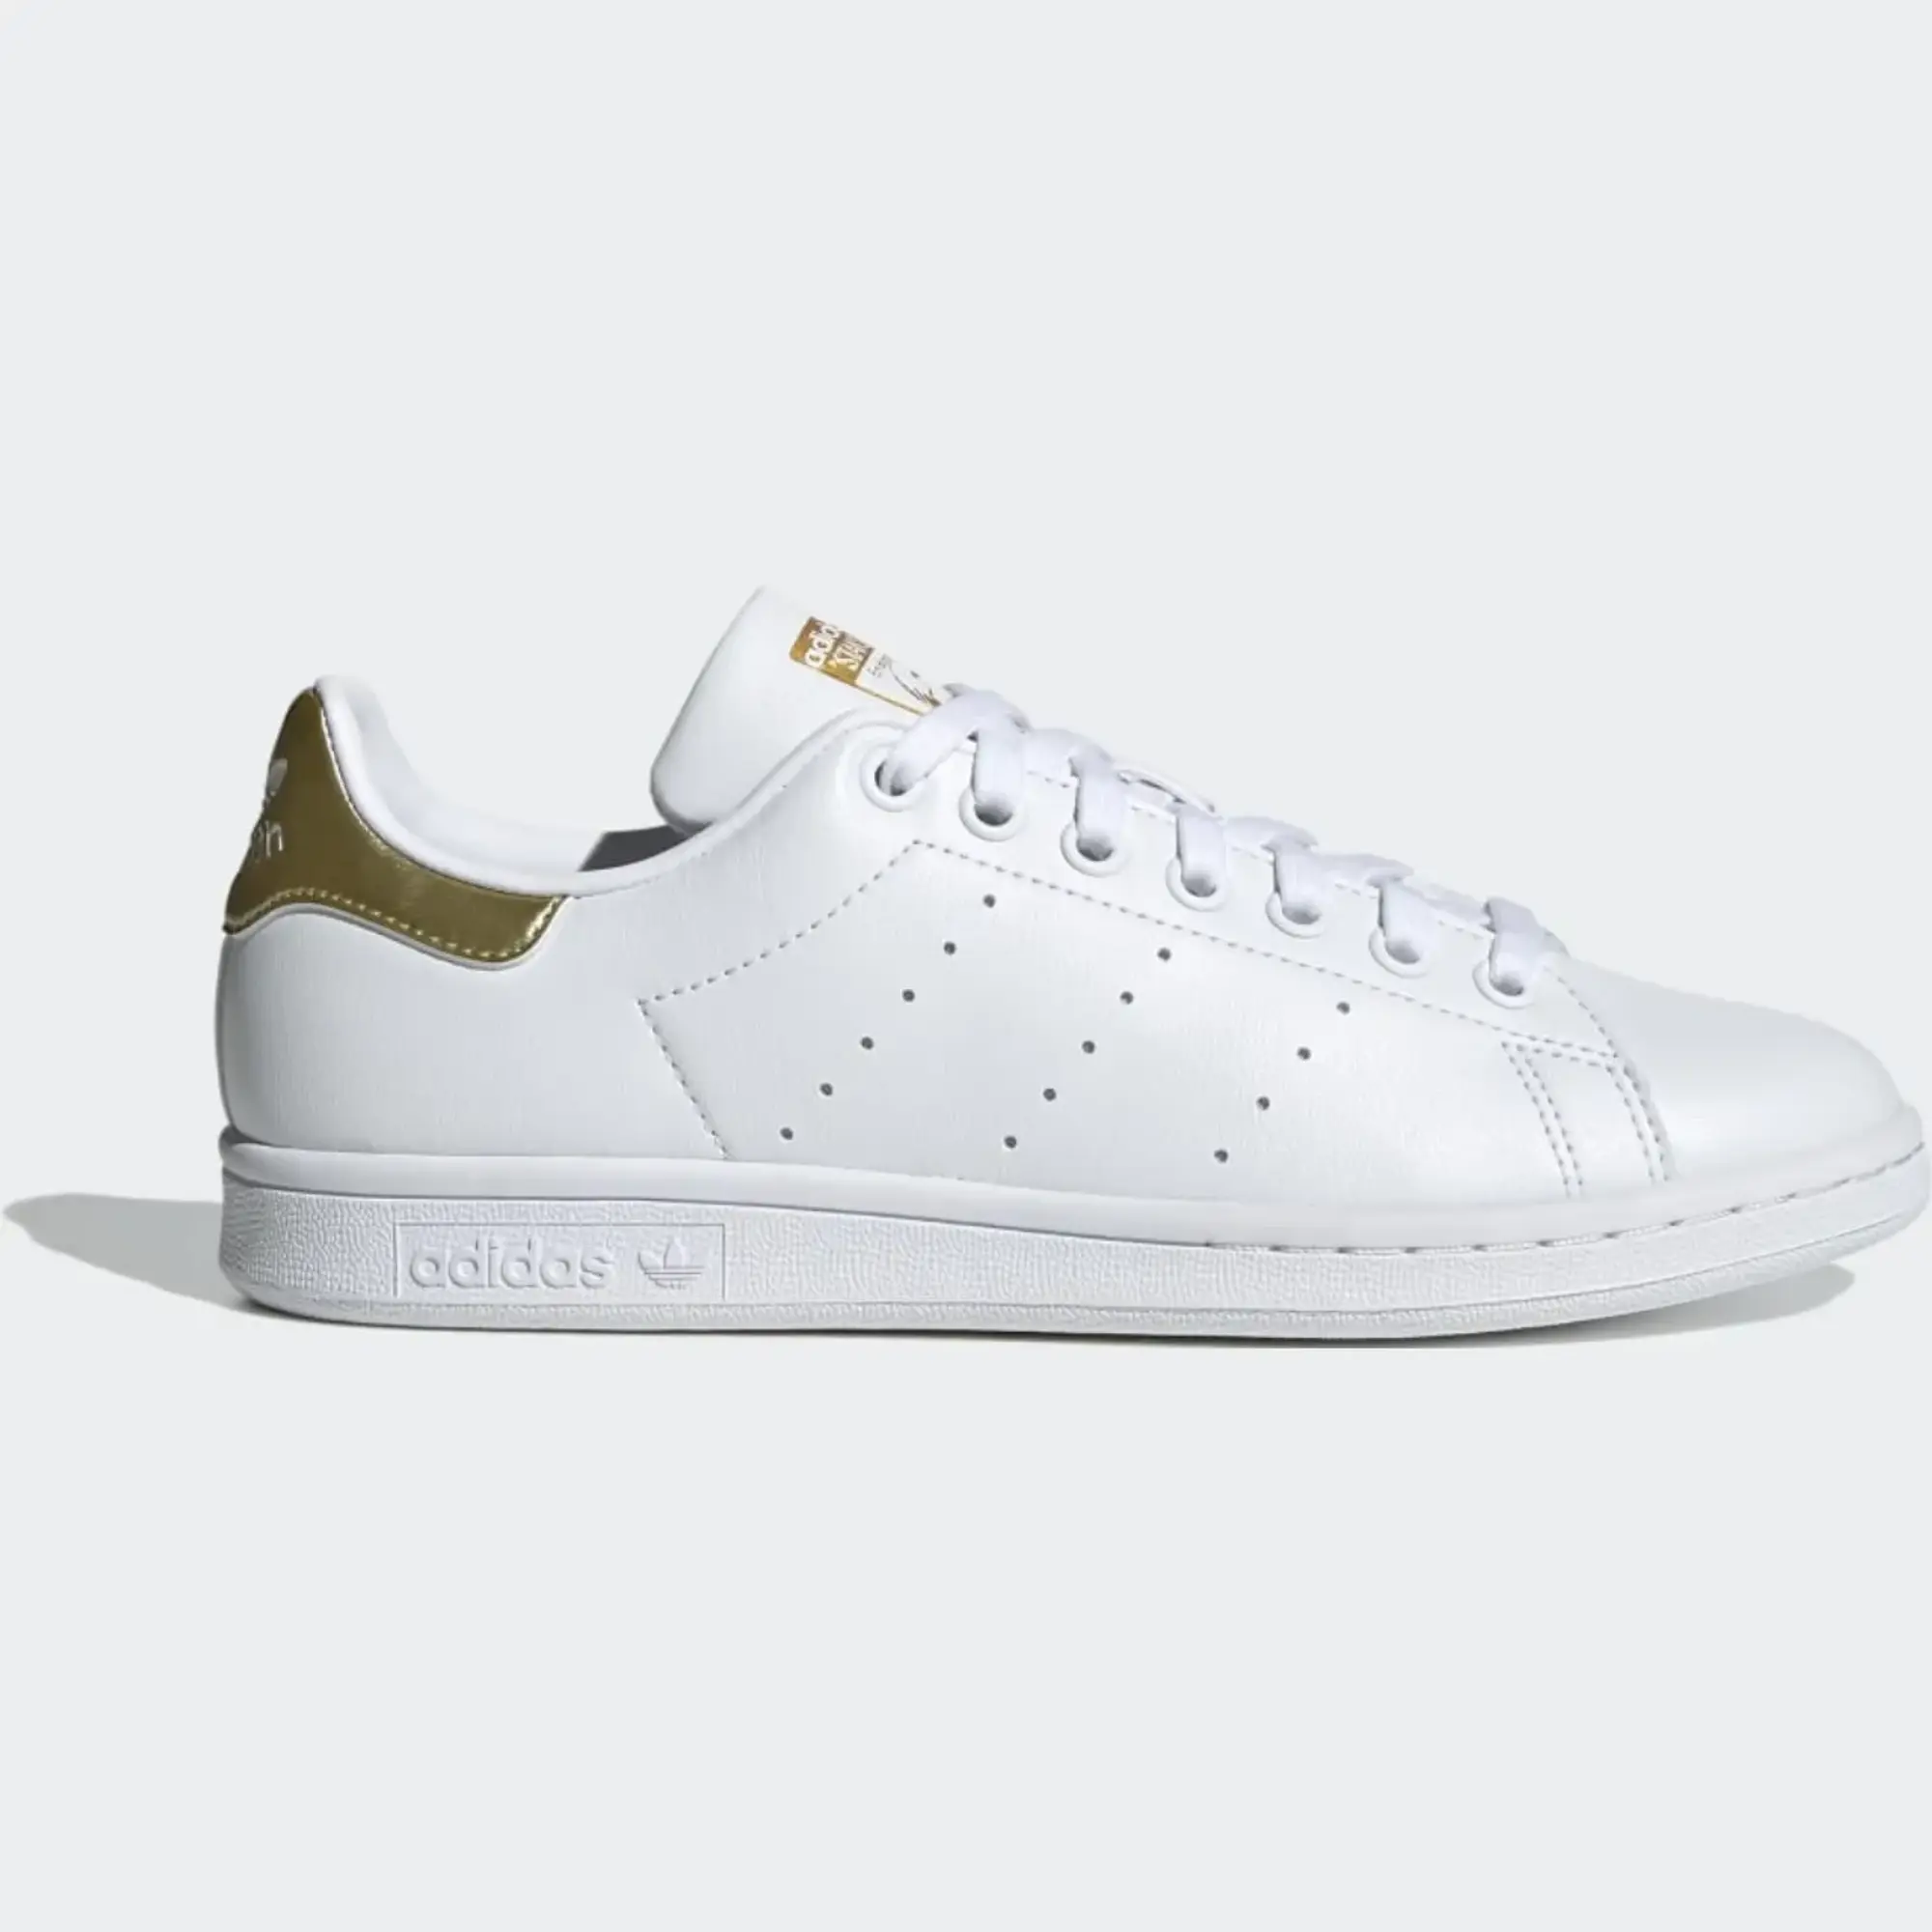 Adidas Originals Stan Smith Trainers In White/Gold